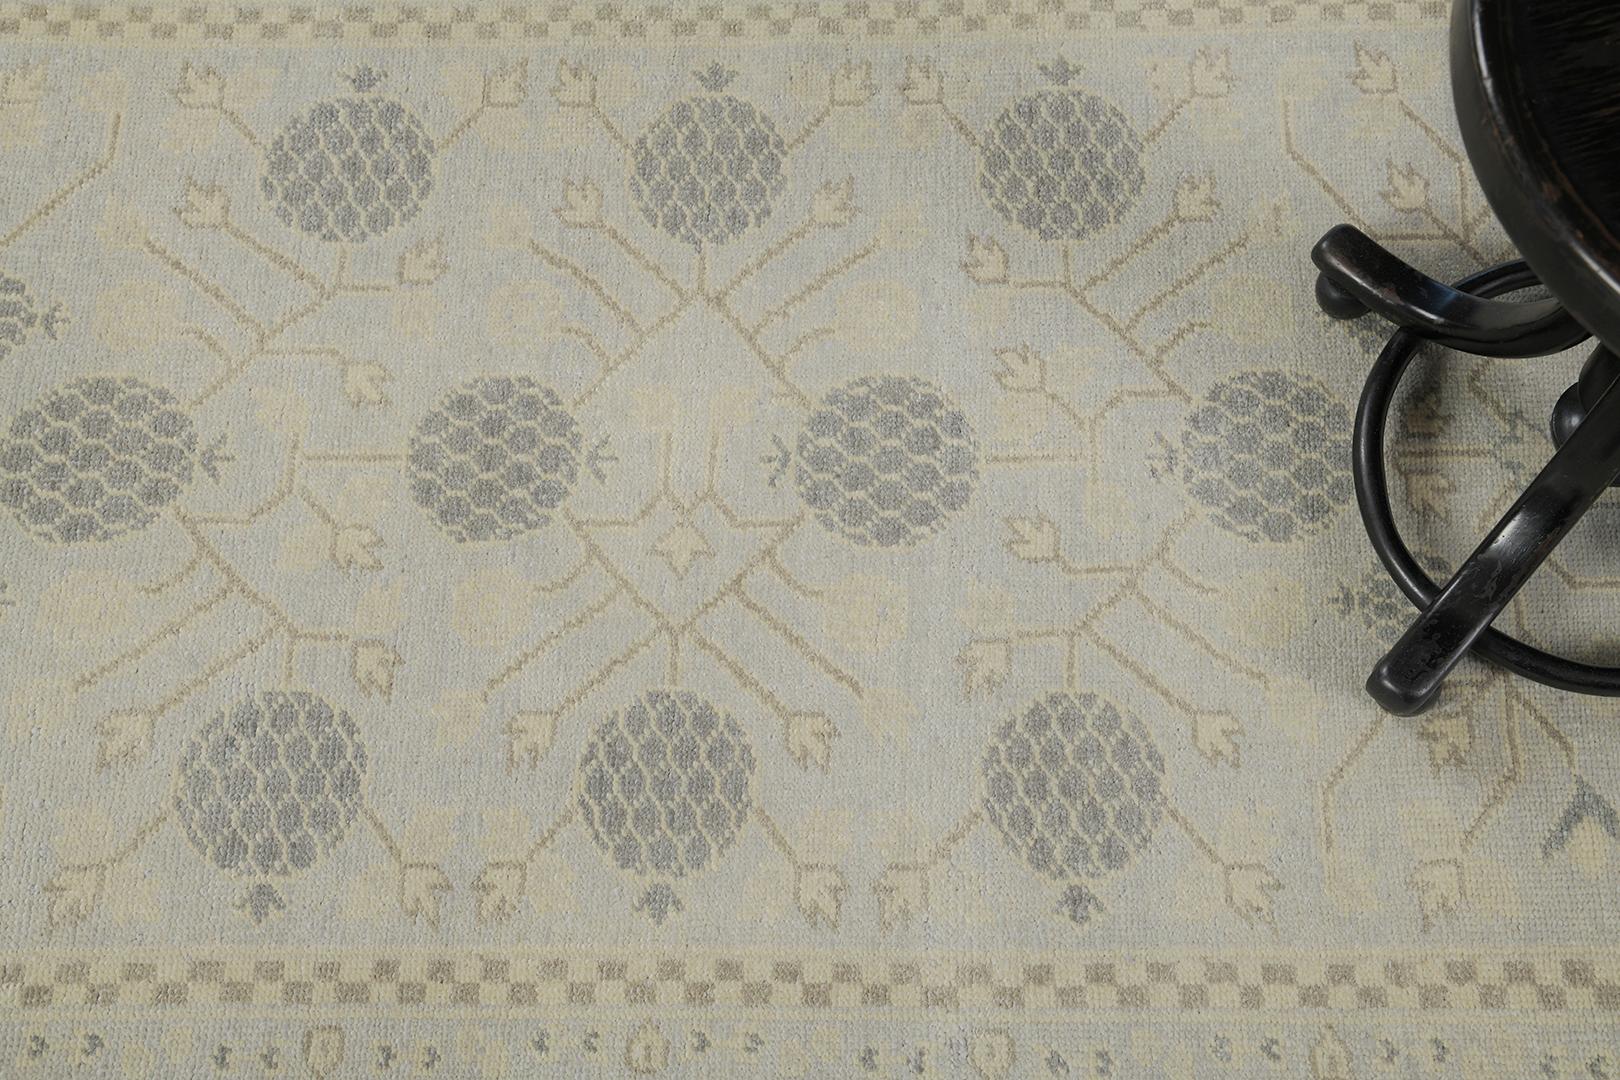 Khotan design rug in vintage style features symmetrical sets of pomegranate elements with geometric vines. Subtle colors blended in muted blue and gray. Surrounded by checkered borderline, symbolic motifs and elements are added to have a great